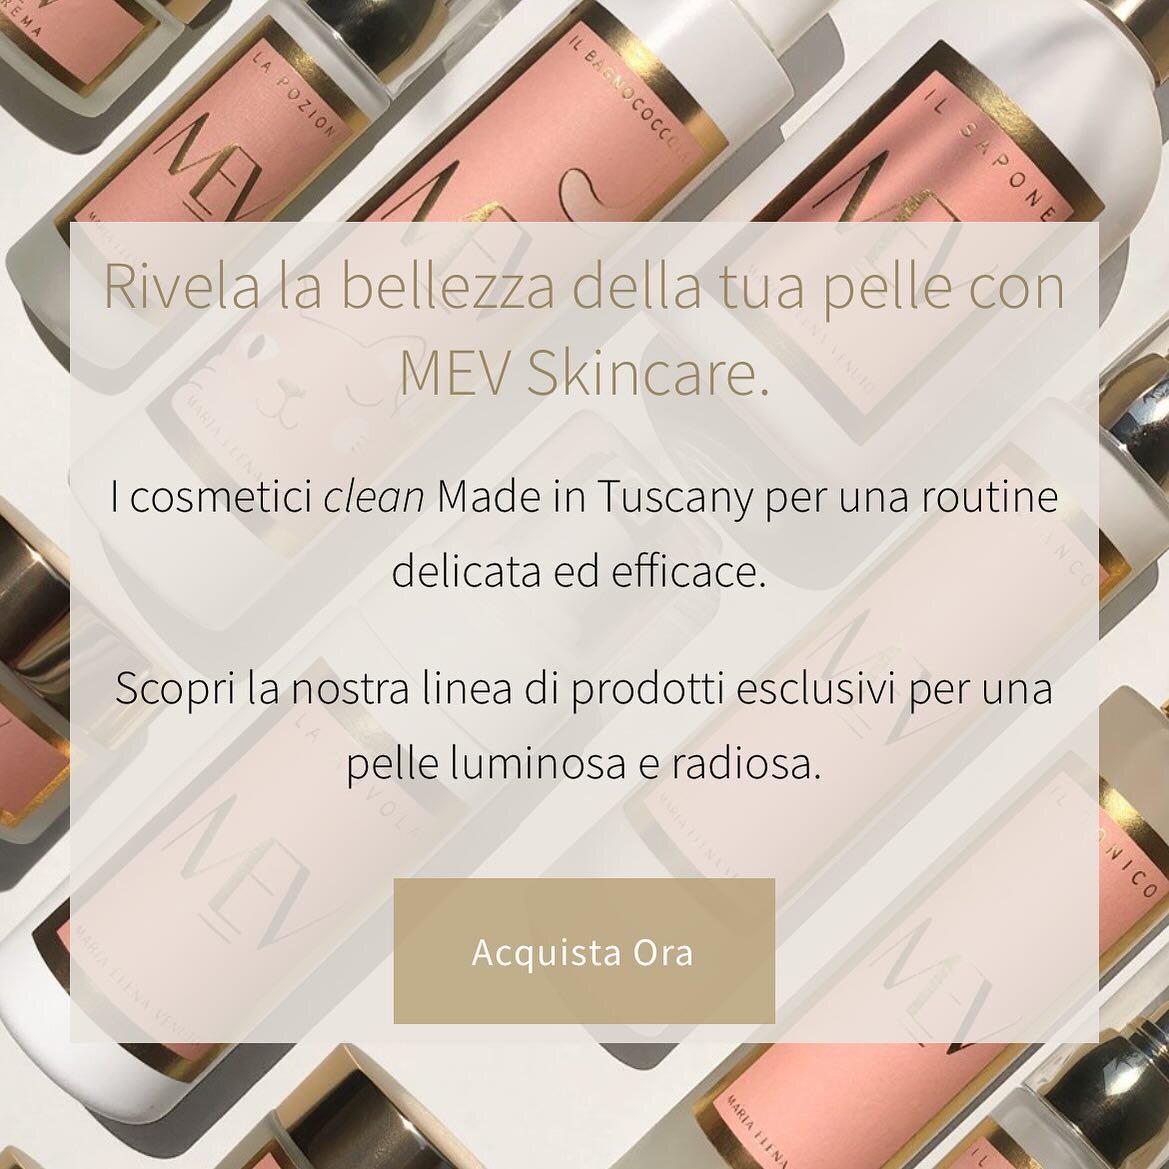 ✨Welcome to MEV Skincare
We are an independent, clean, and high-quality skincare brand 100% made in Tuscany (Italy), committed to empowering you on your journey to radiant and healthy skin.

Our carefully crafted products are designed with love and p